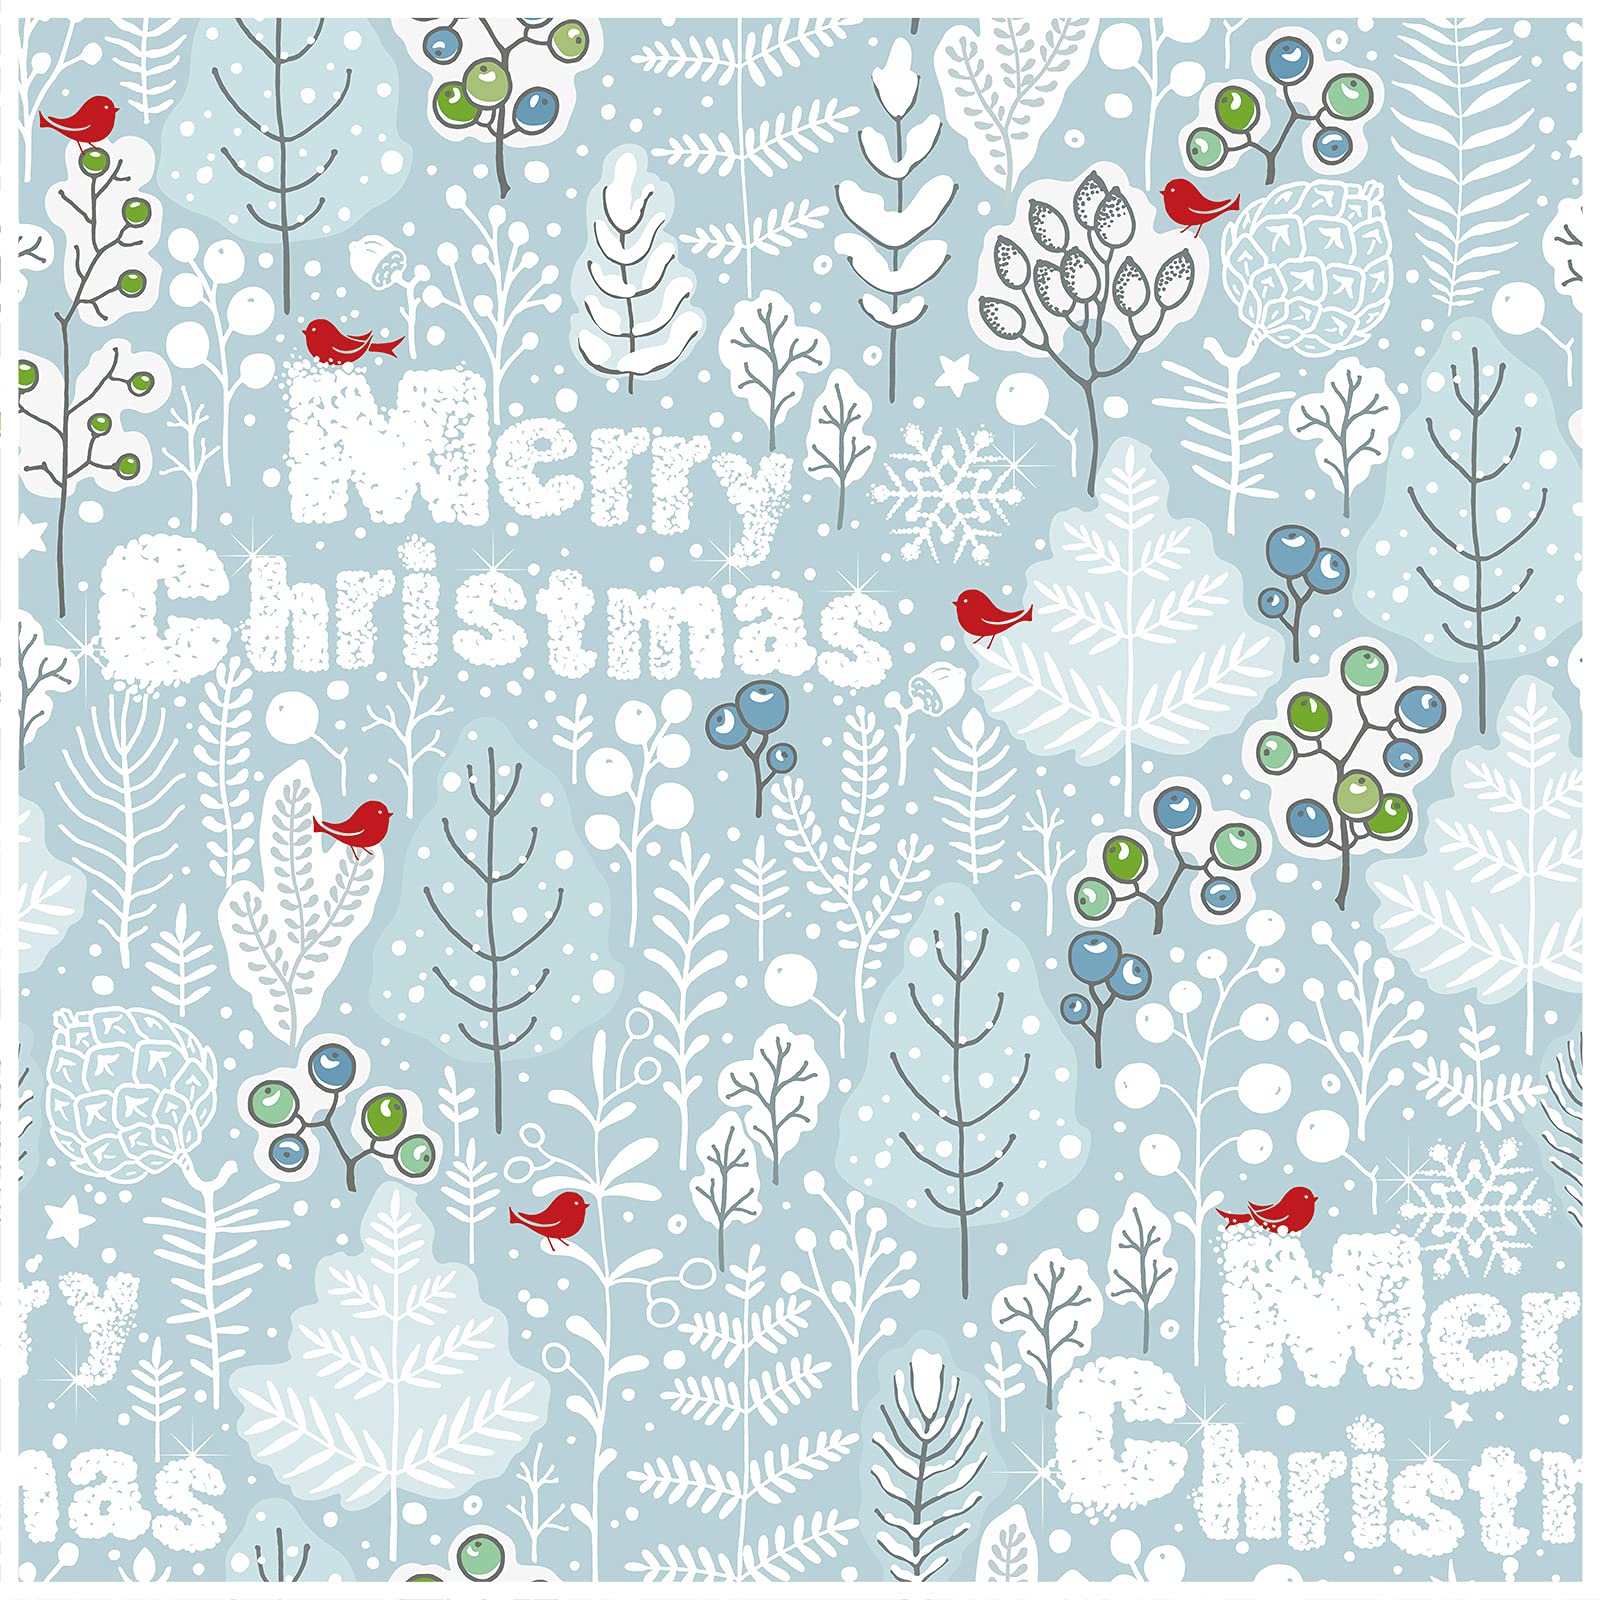 HaokHome 99031 Christmas Decorations Peel And Stick Wallpaper Birds Berries Trees Light Blue White Red Stick On Home Decorations 17.7in X 118in, Everything Else